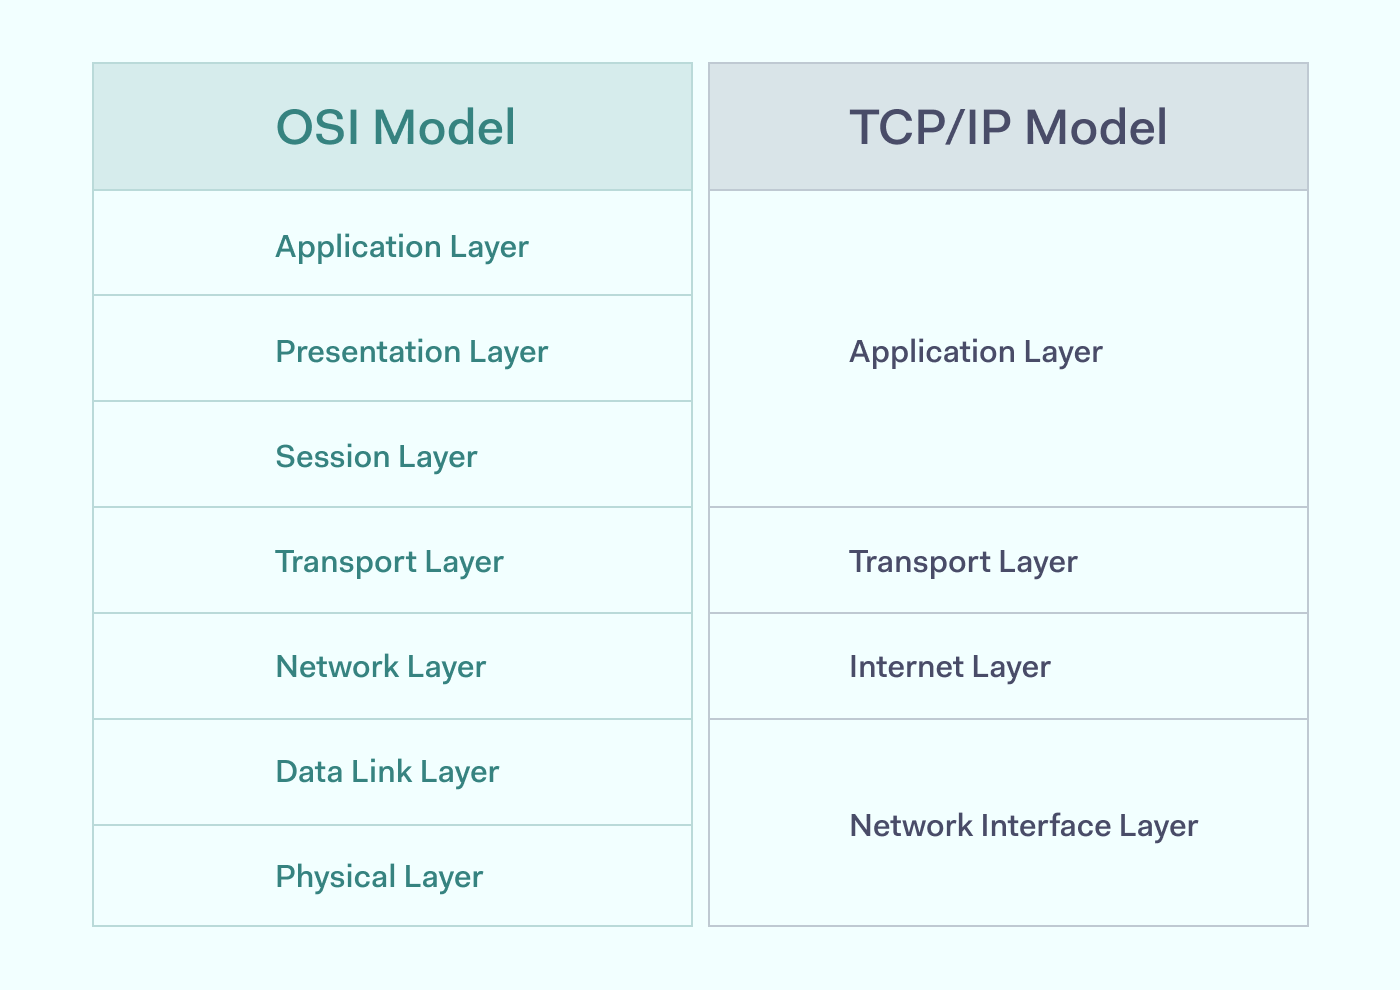 OSI model layers and TCP/IP model layer comparison table